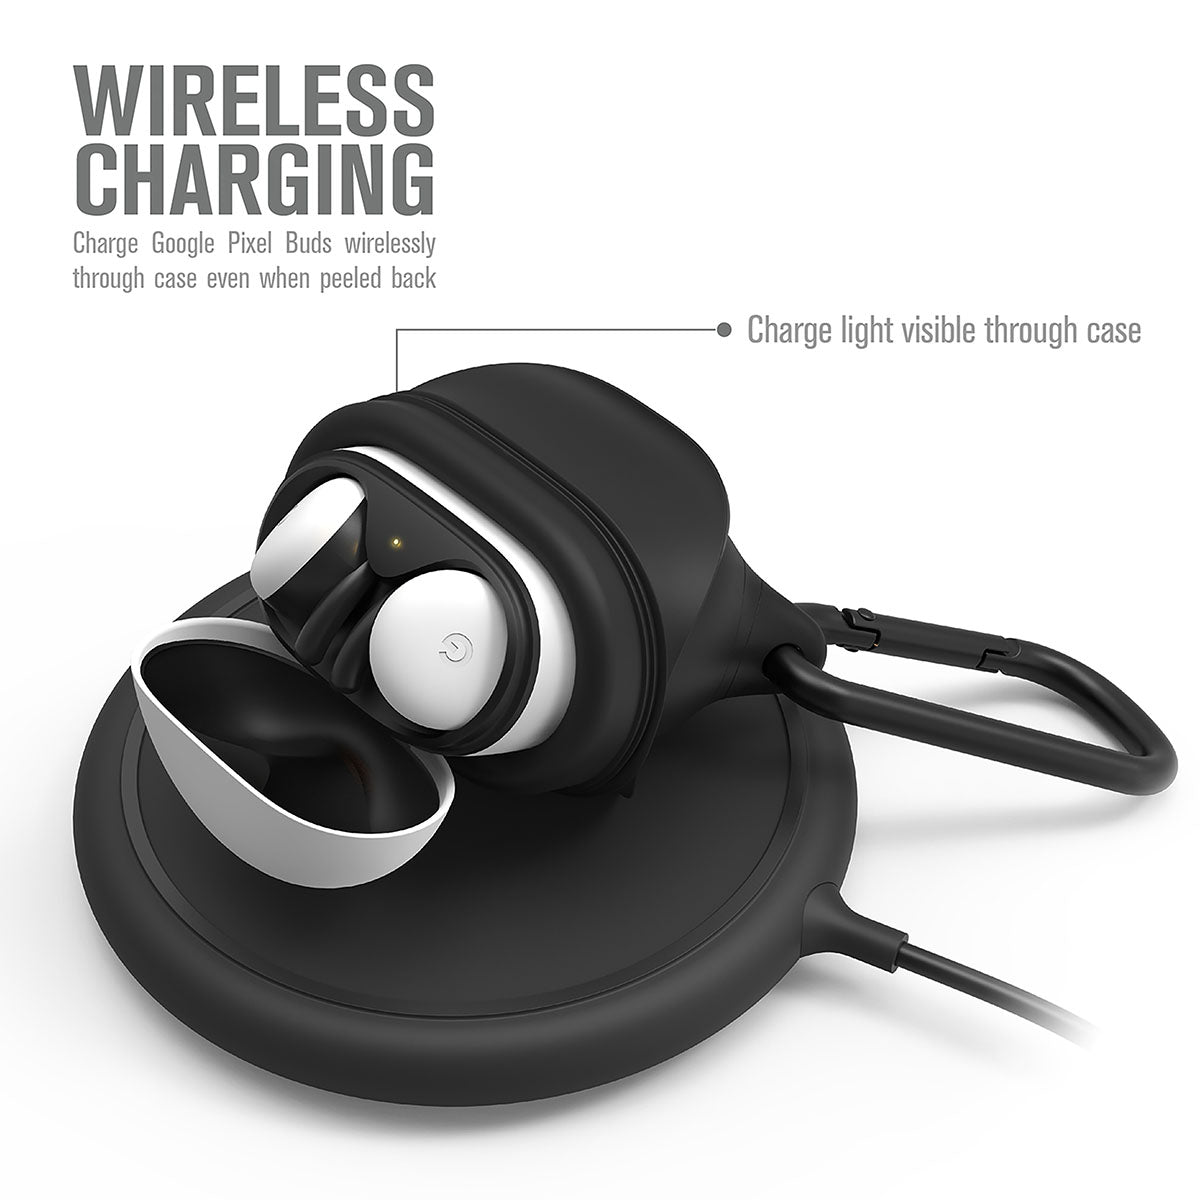 Catalyst Google pixel buds 2 waterproof case showing magsafe wireless charging text reads wireless charging charge google pixel buds wirelessly throuh case even when peeled back charge light visible case   